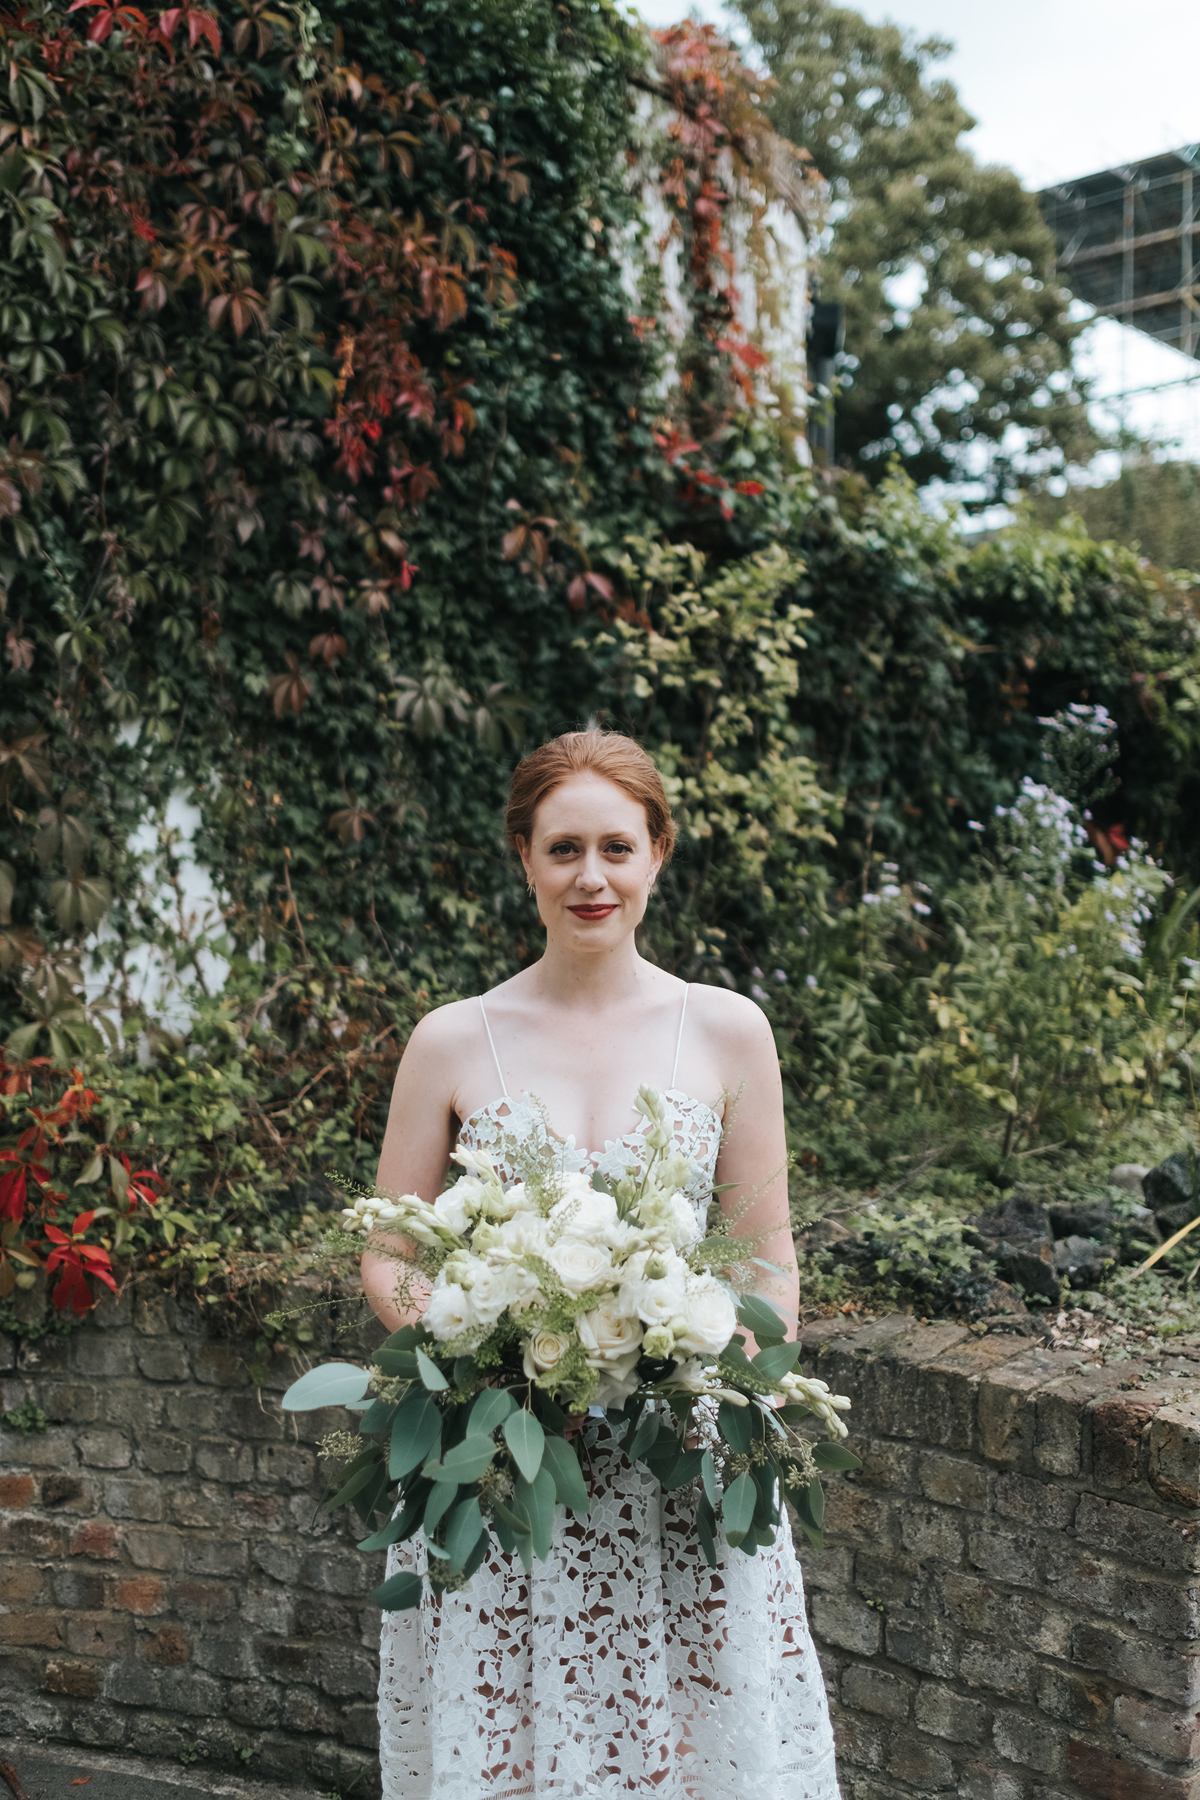 Self portrait wedding dress and large wedding bouquet in greens and neutrals